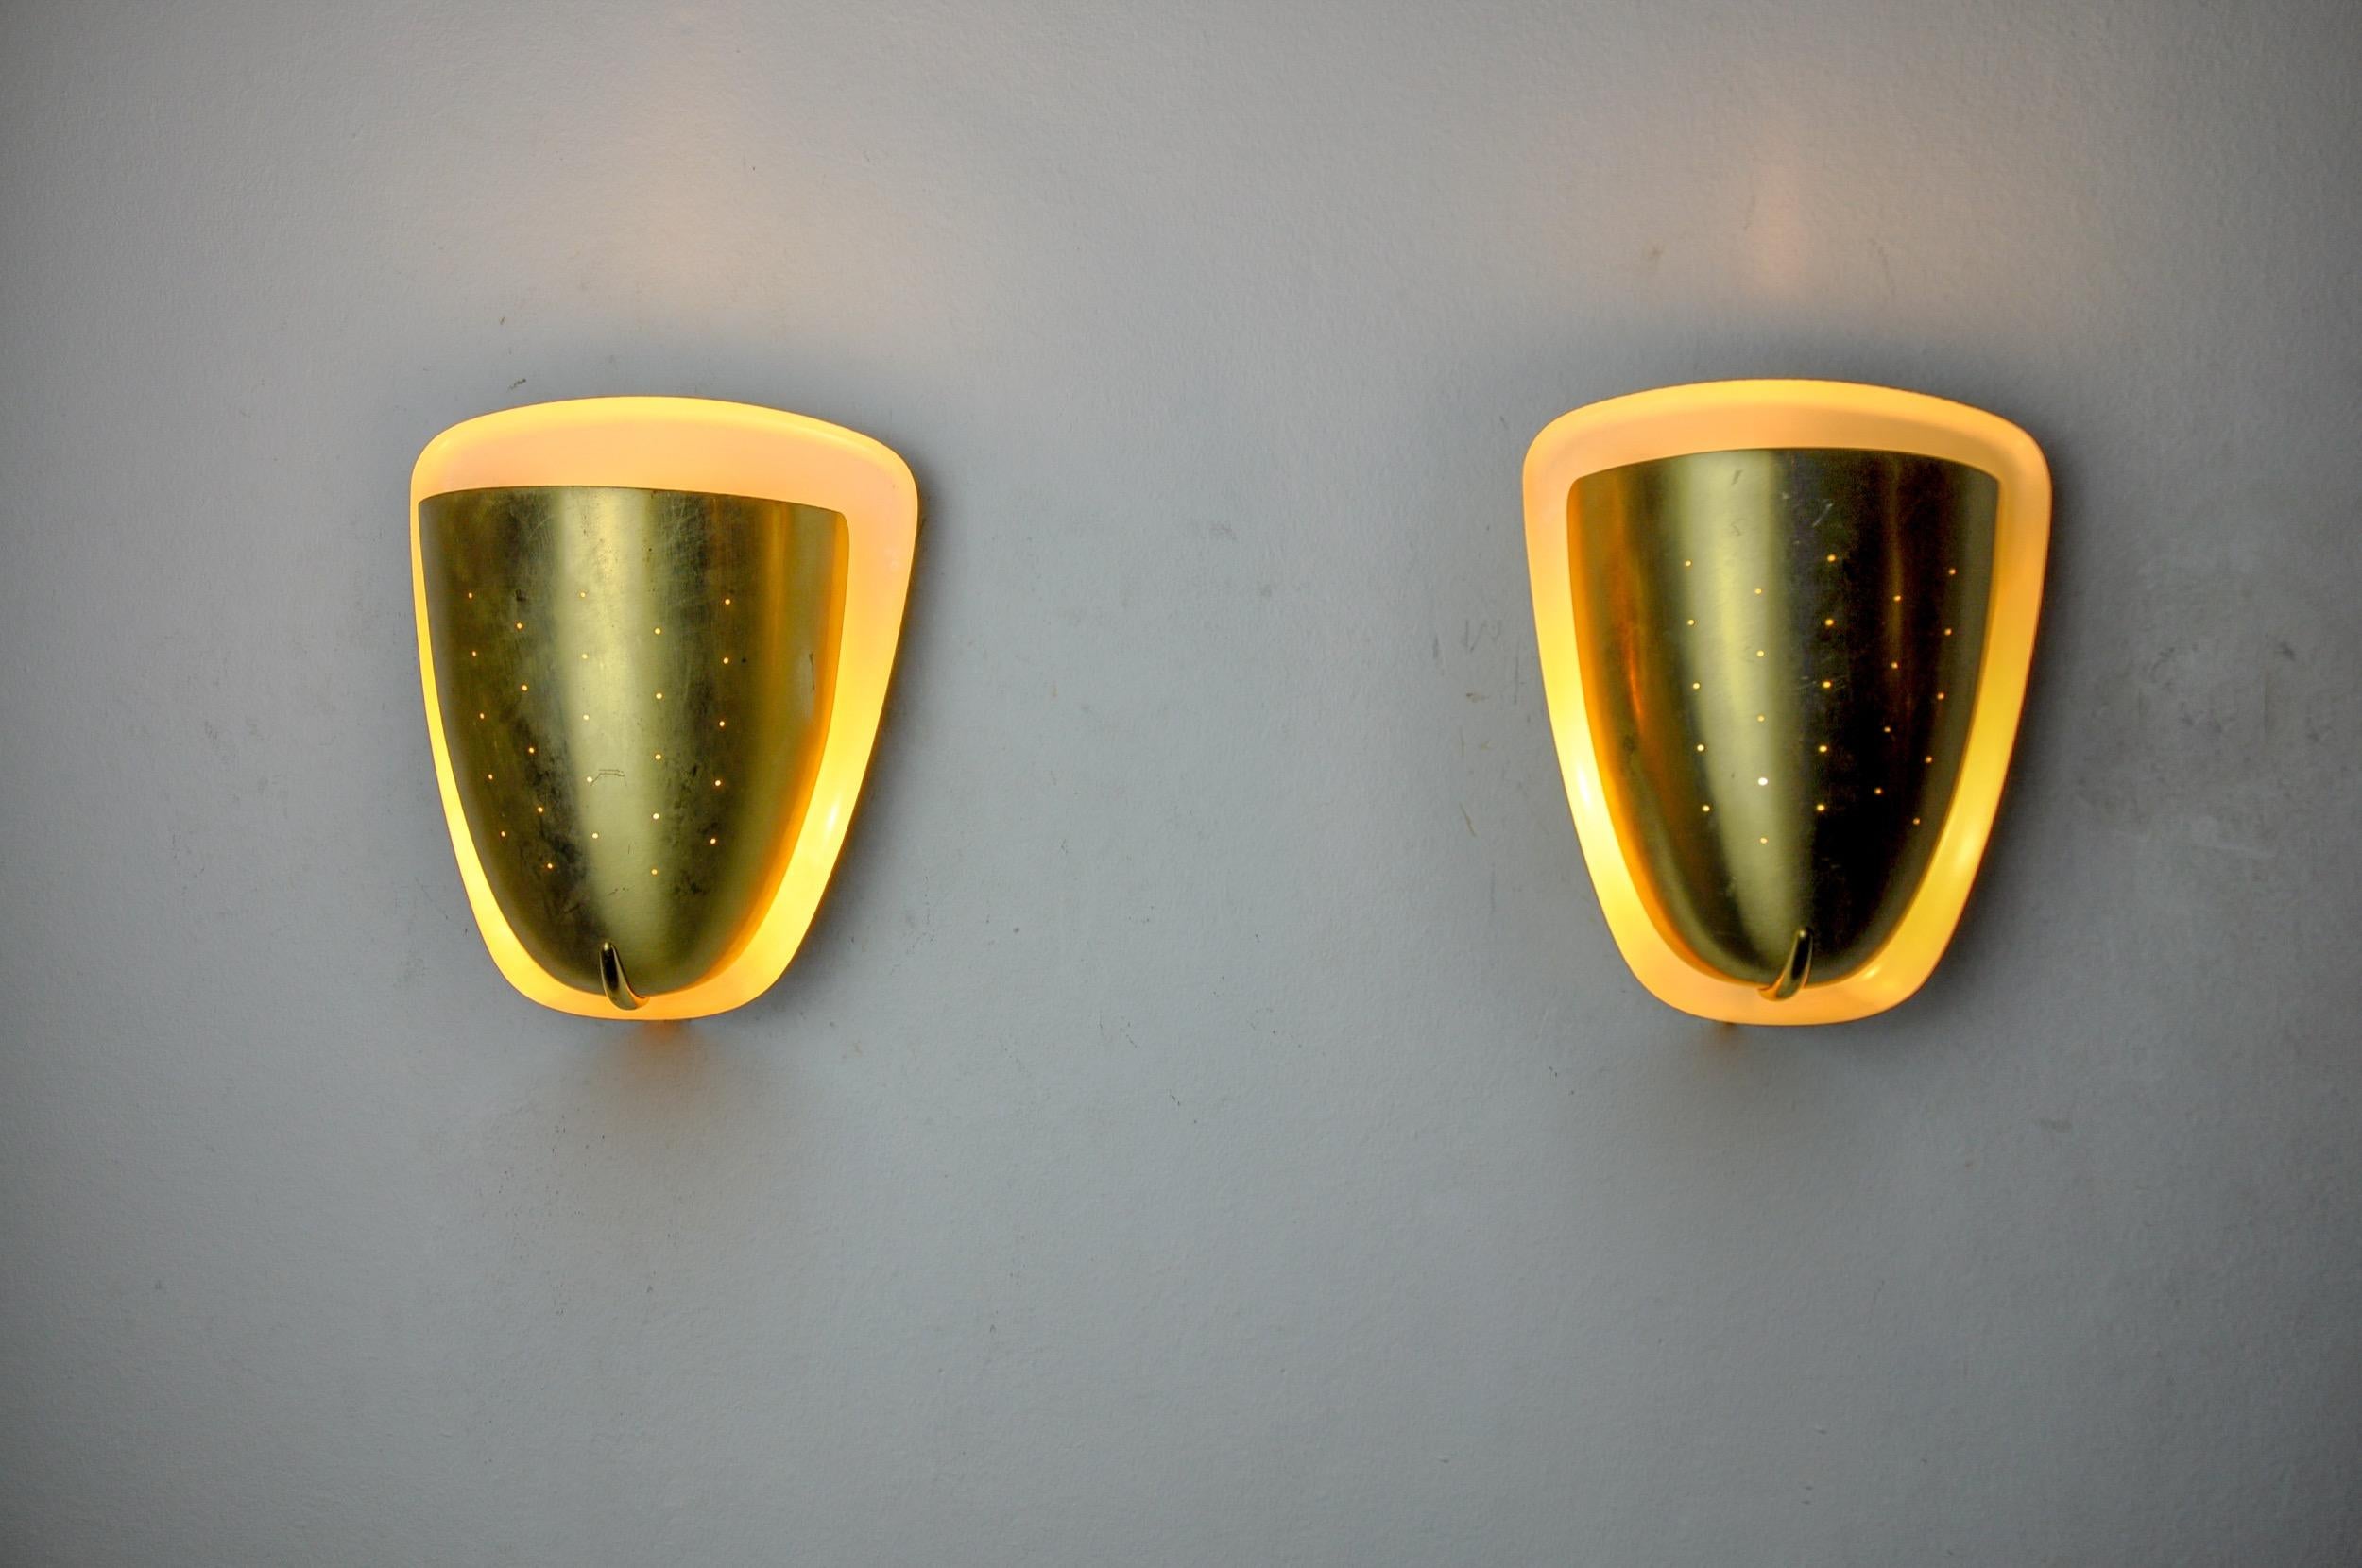 Very beautiful and rare pair of regency wall lamps in brass designated and produced in italy in the 1970s. Gilded brass structure and white interior creating a beautiful play of light. These sconces will perfectly illuminate your interior. Very nice